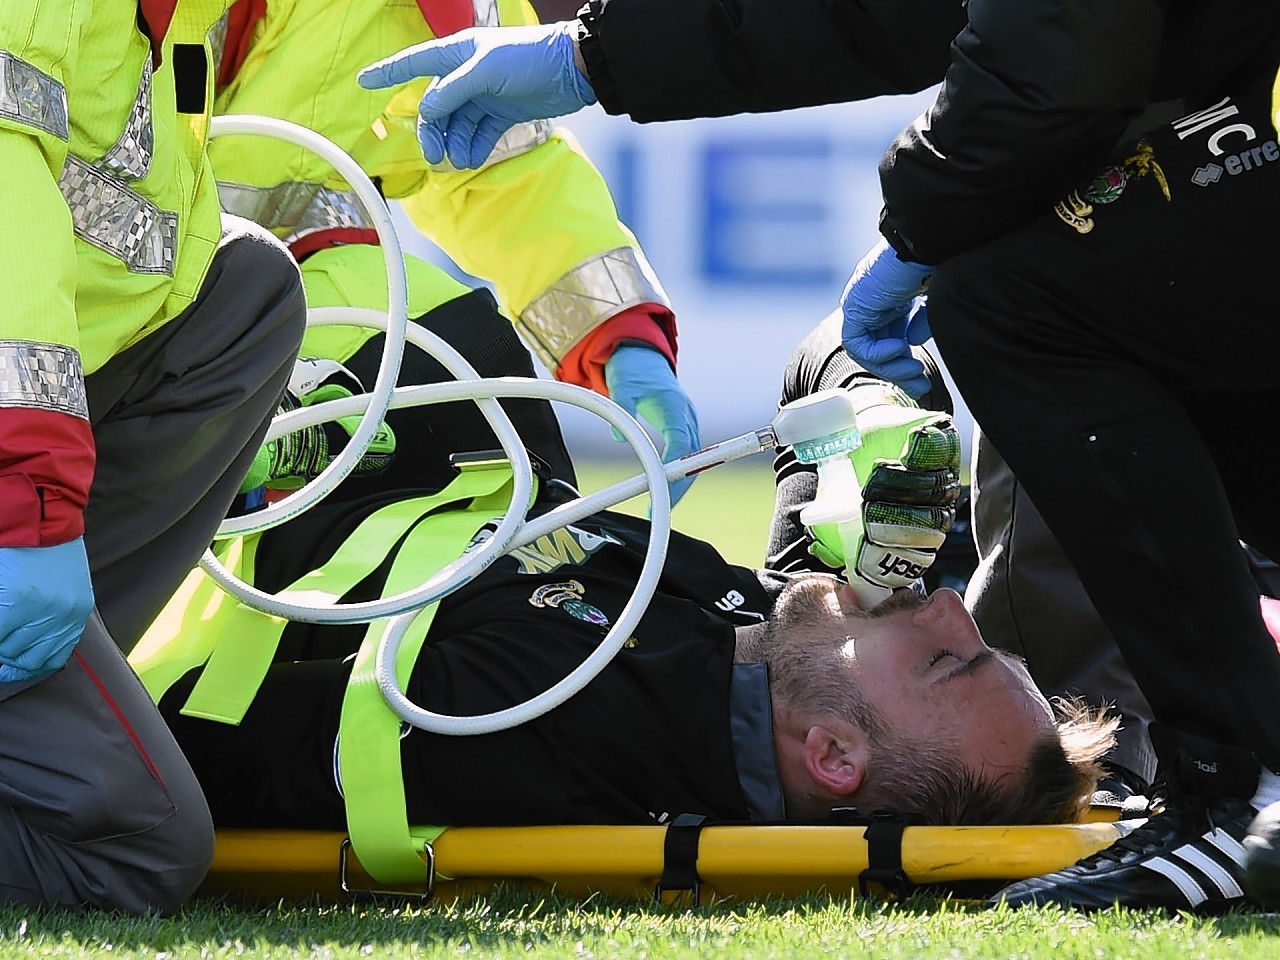 Dean Brill suffered a dislocated knee in a game against Celtic last April.